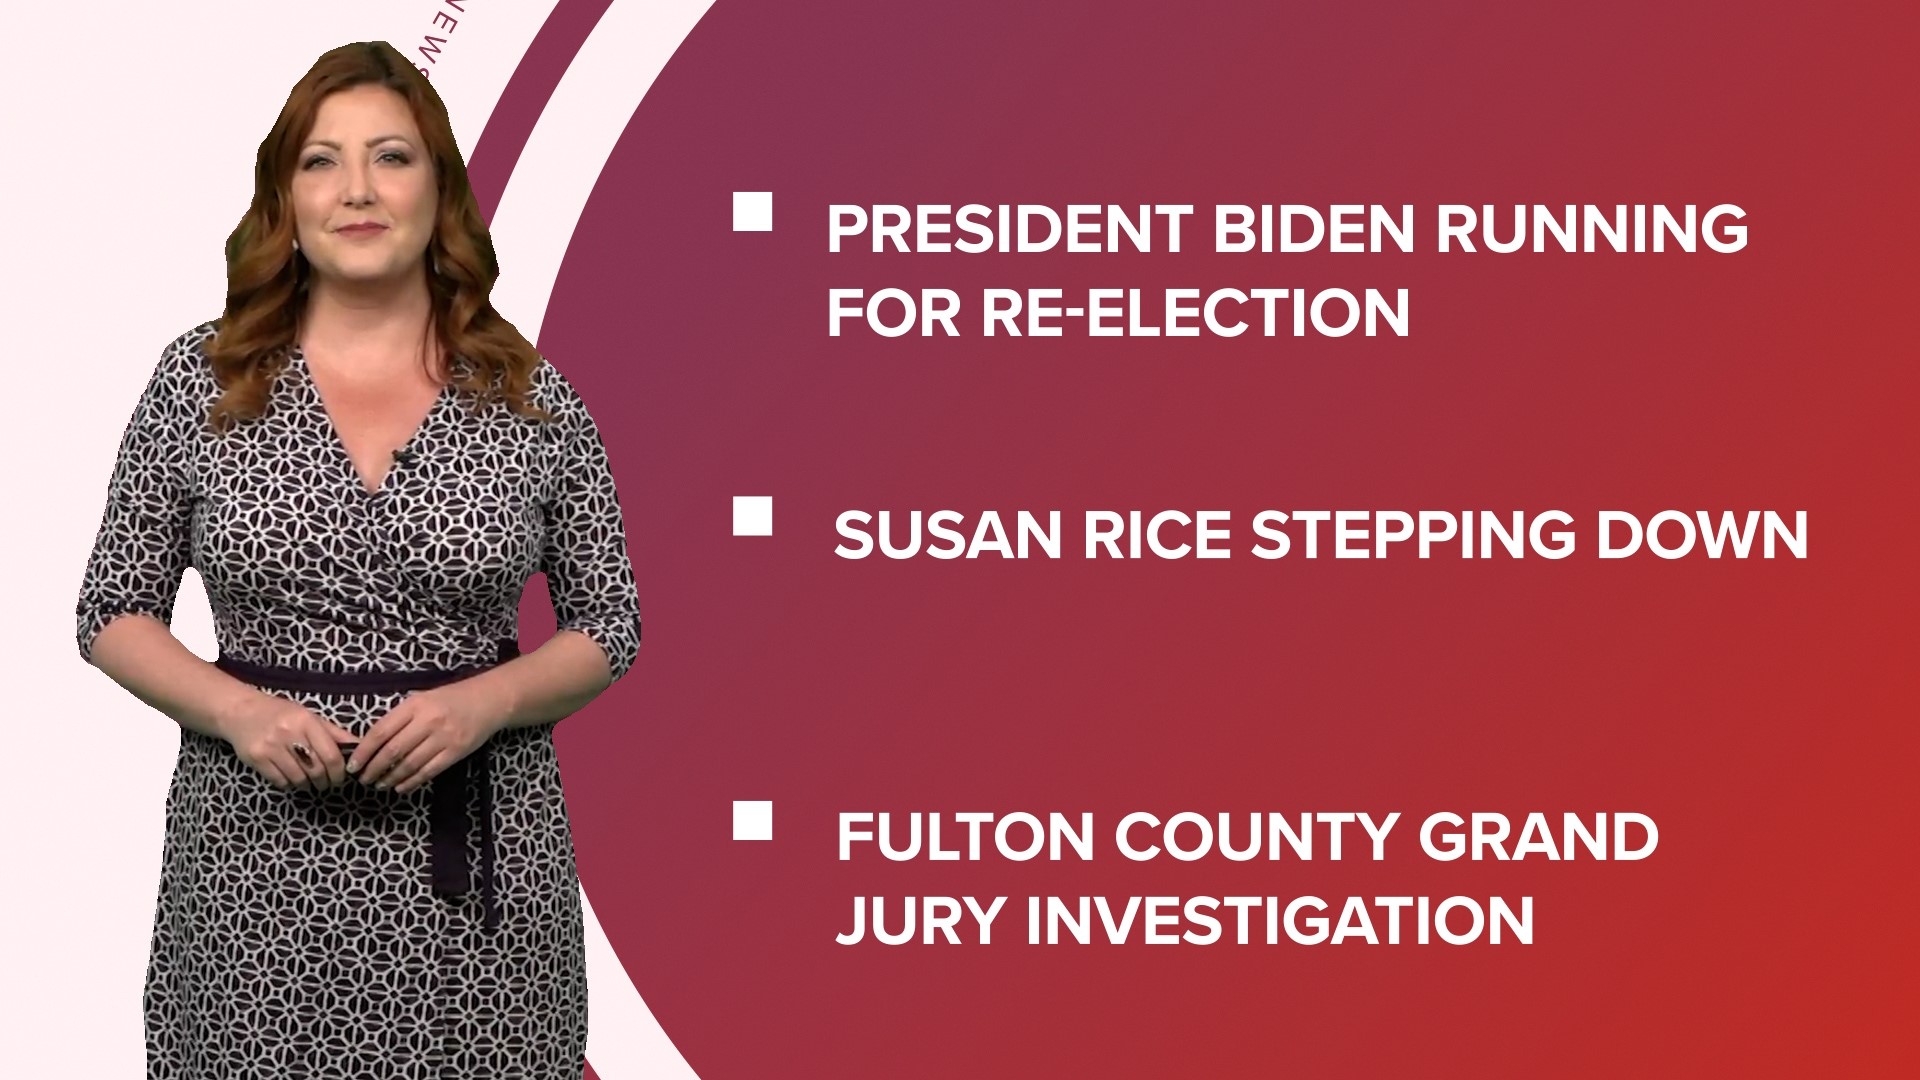 A look at what is happening in the news from President Joe Biden announcing his re-election campaign for 2024 to using Bed Bath and Beyond coupons.